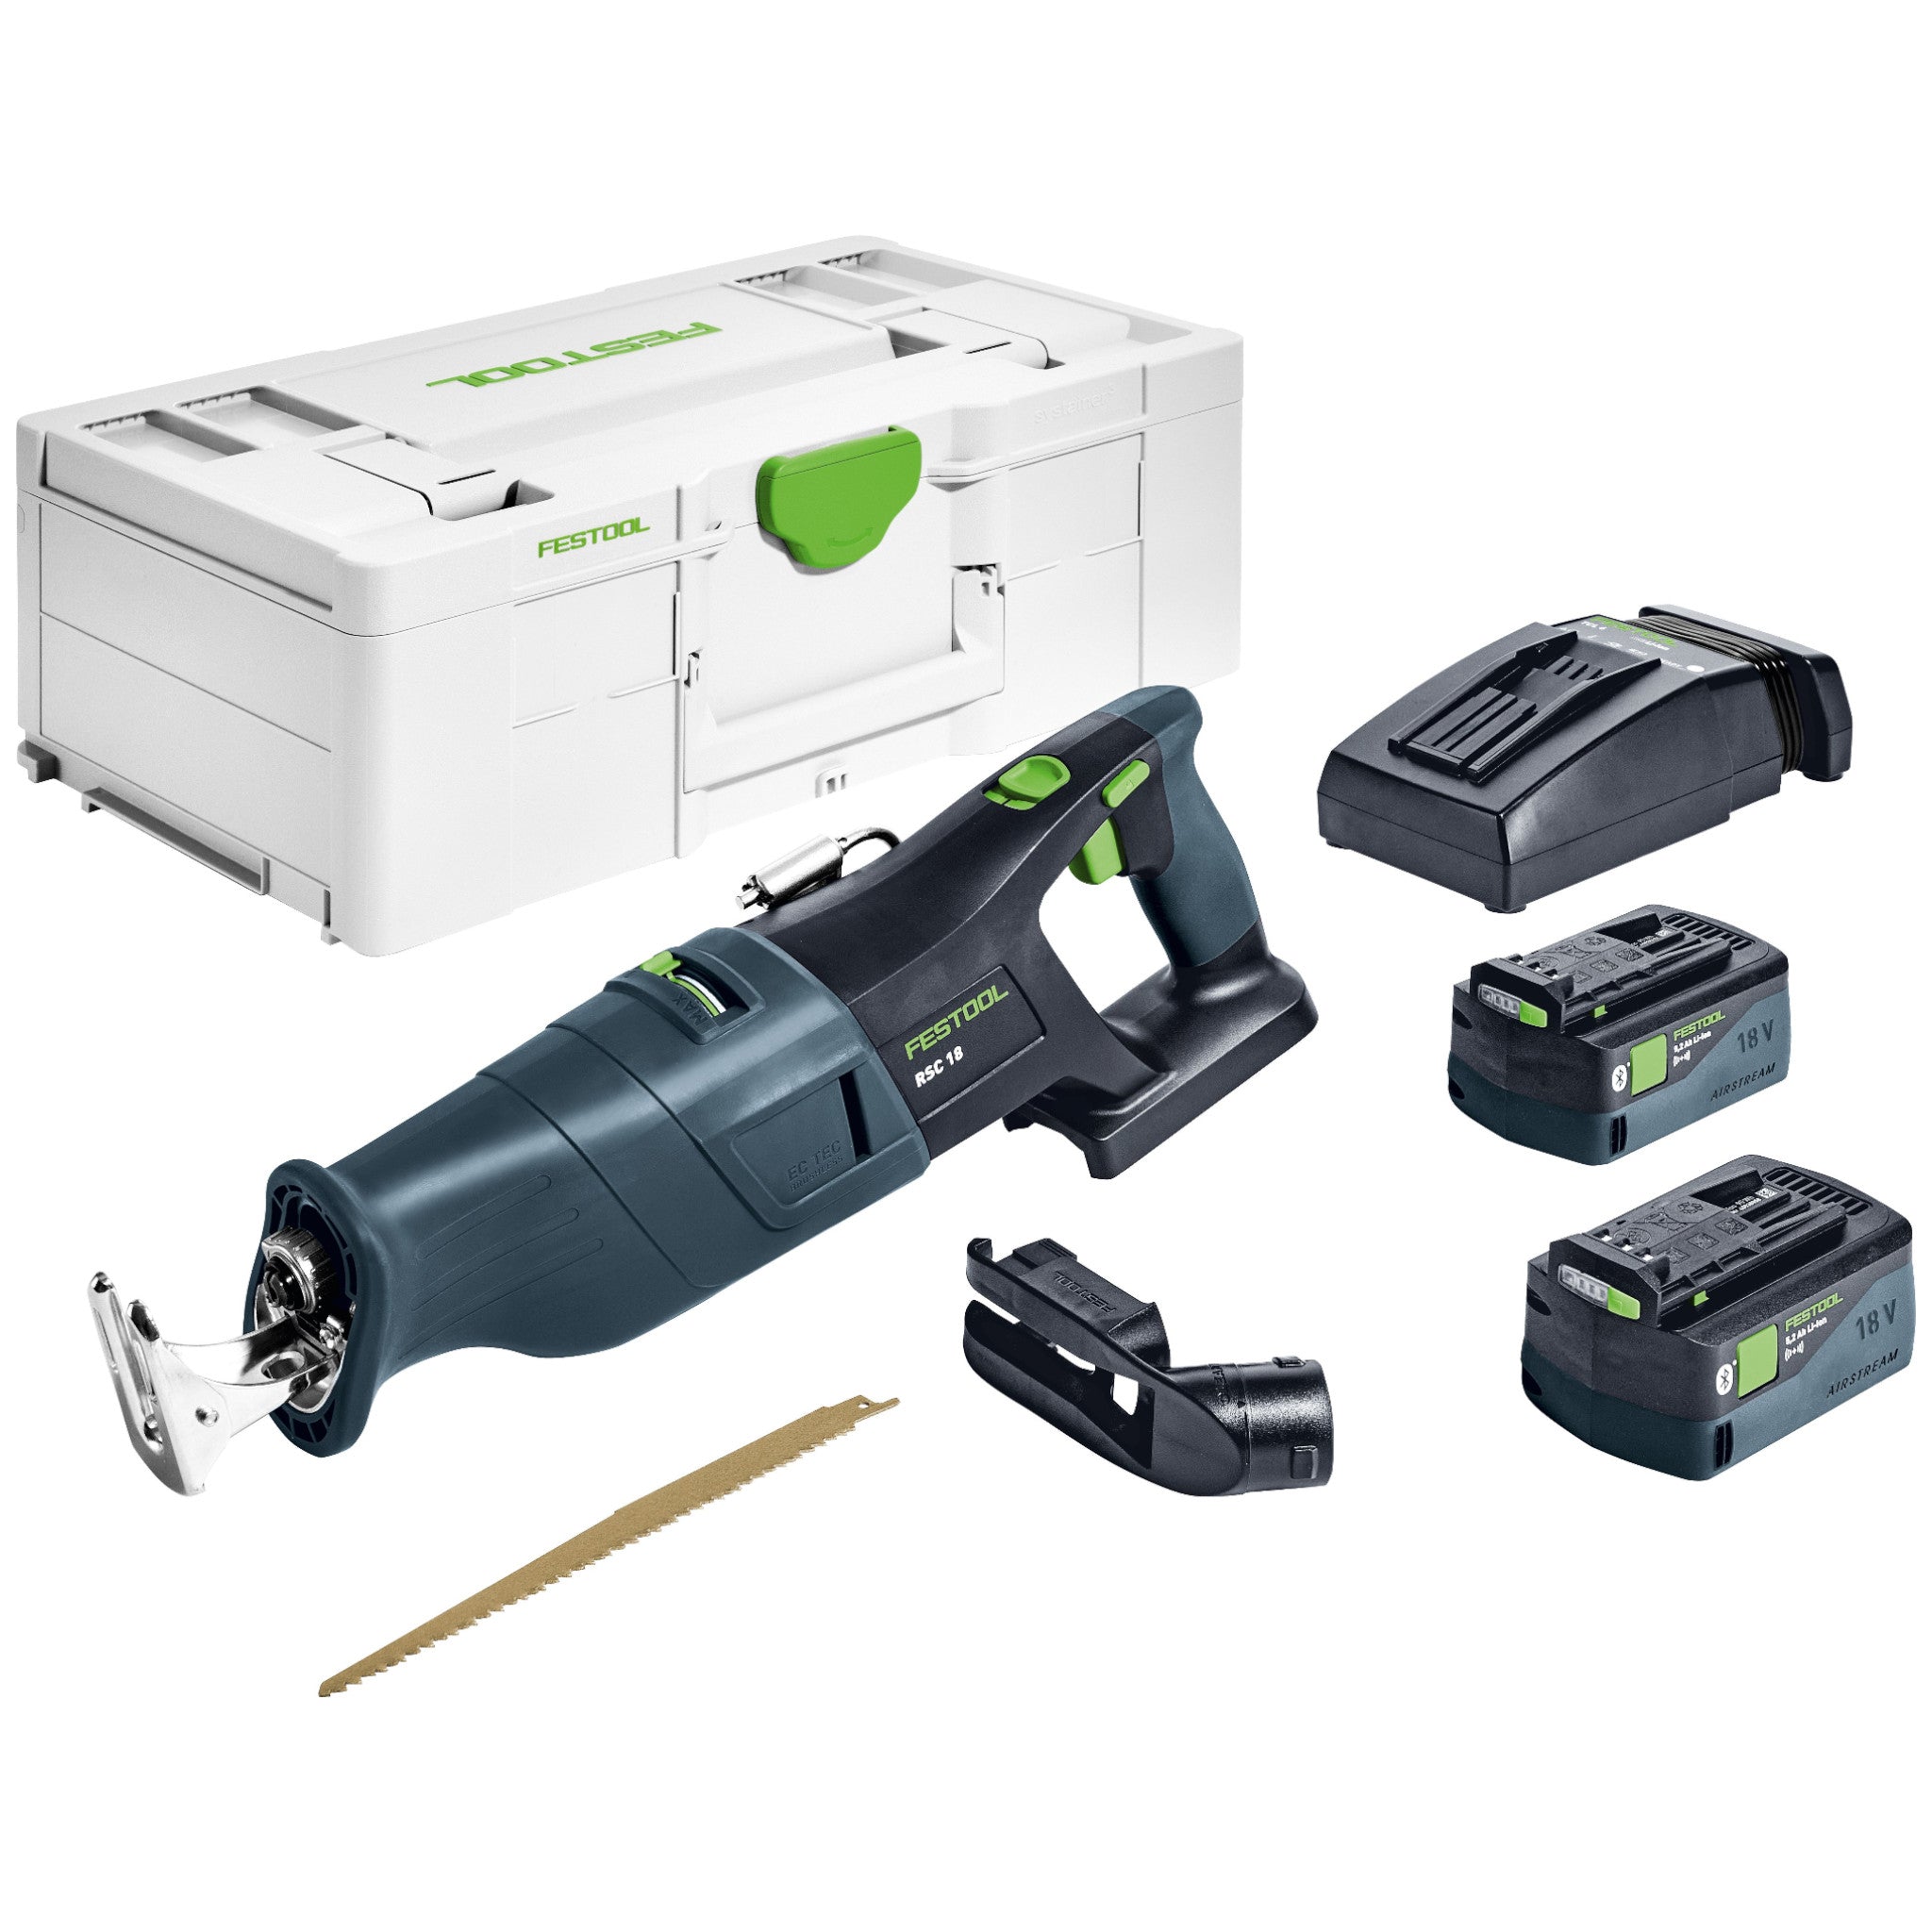 RSC18 18V Cordless Reciprocating Saw 5.0Ah Bluetooth Set in Systainer 578293 by Festool